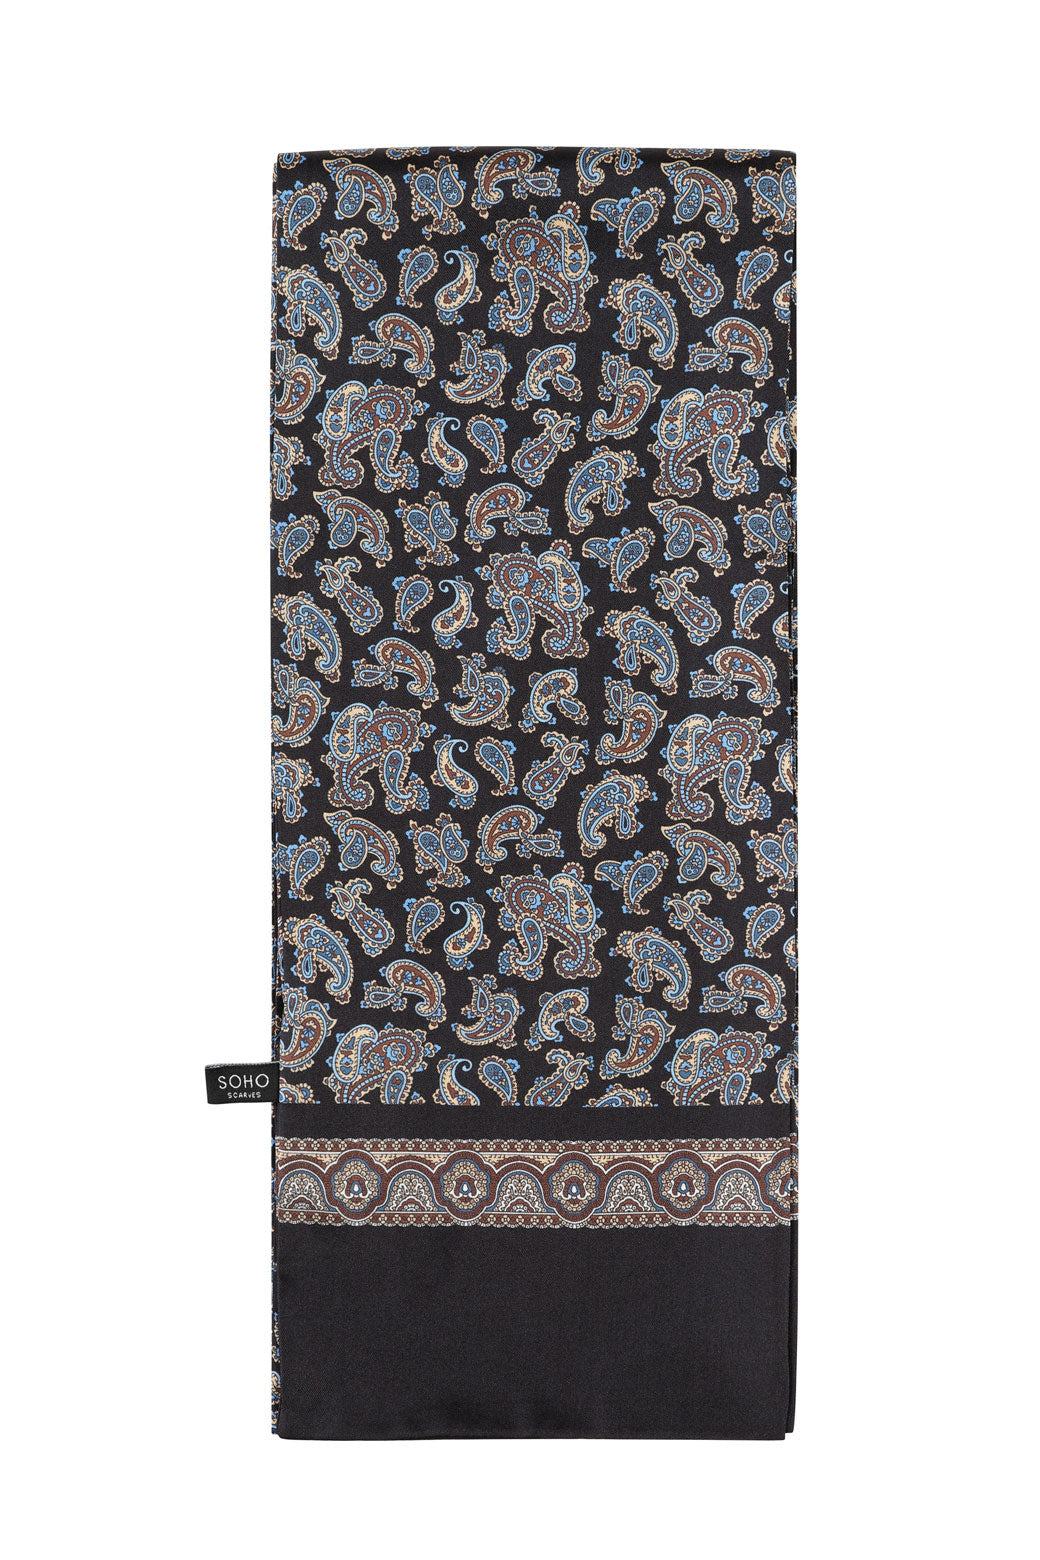 'The Dylan' paisley silk scarf arranged in a rectangular shape, showing the blue, red and cream paisley patterns on a black ground.